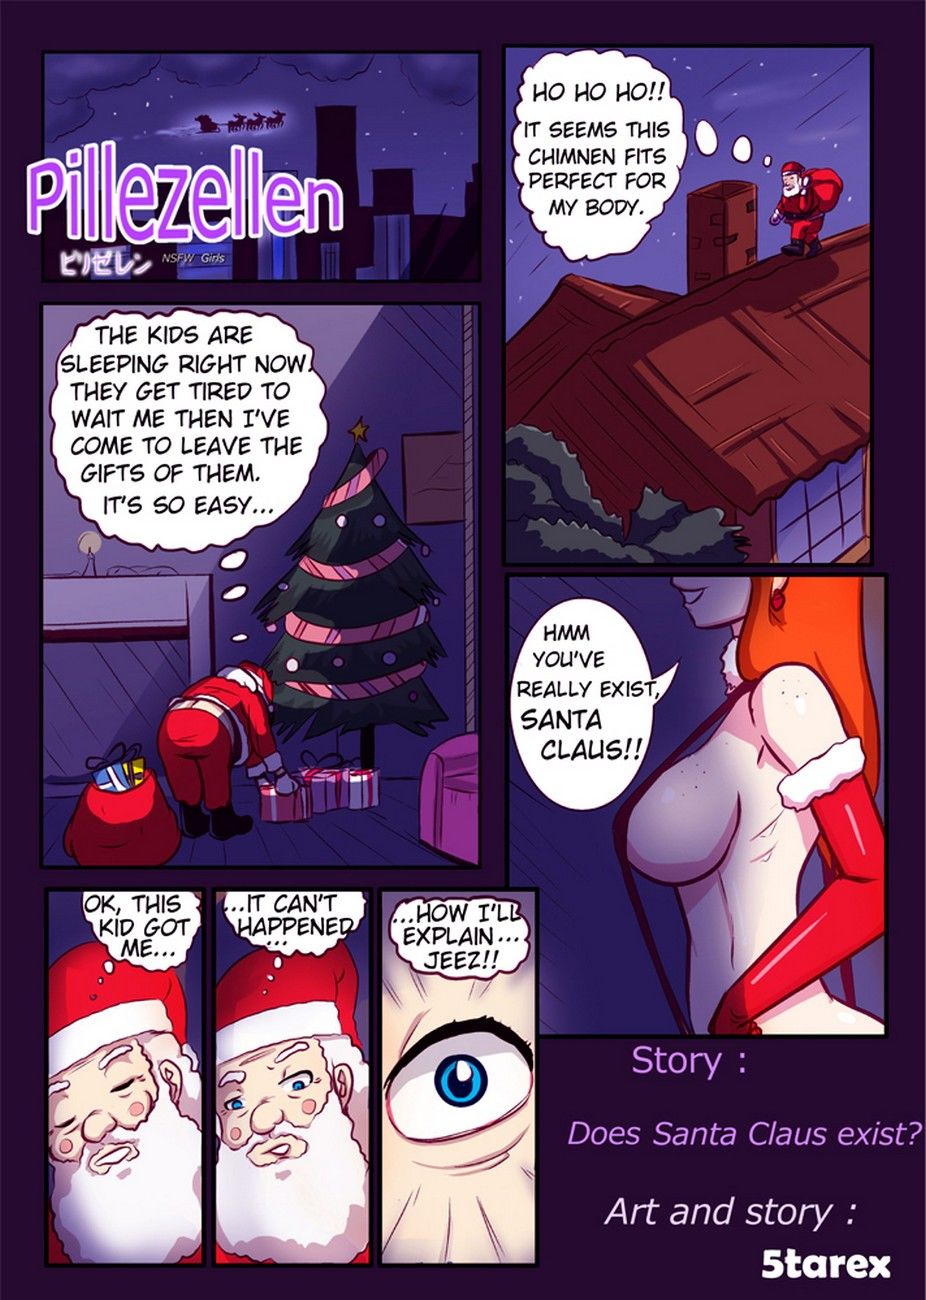 Does Santa Claus Exist page 2